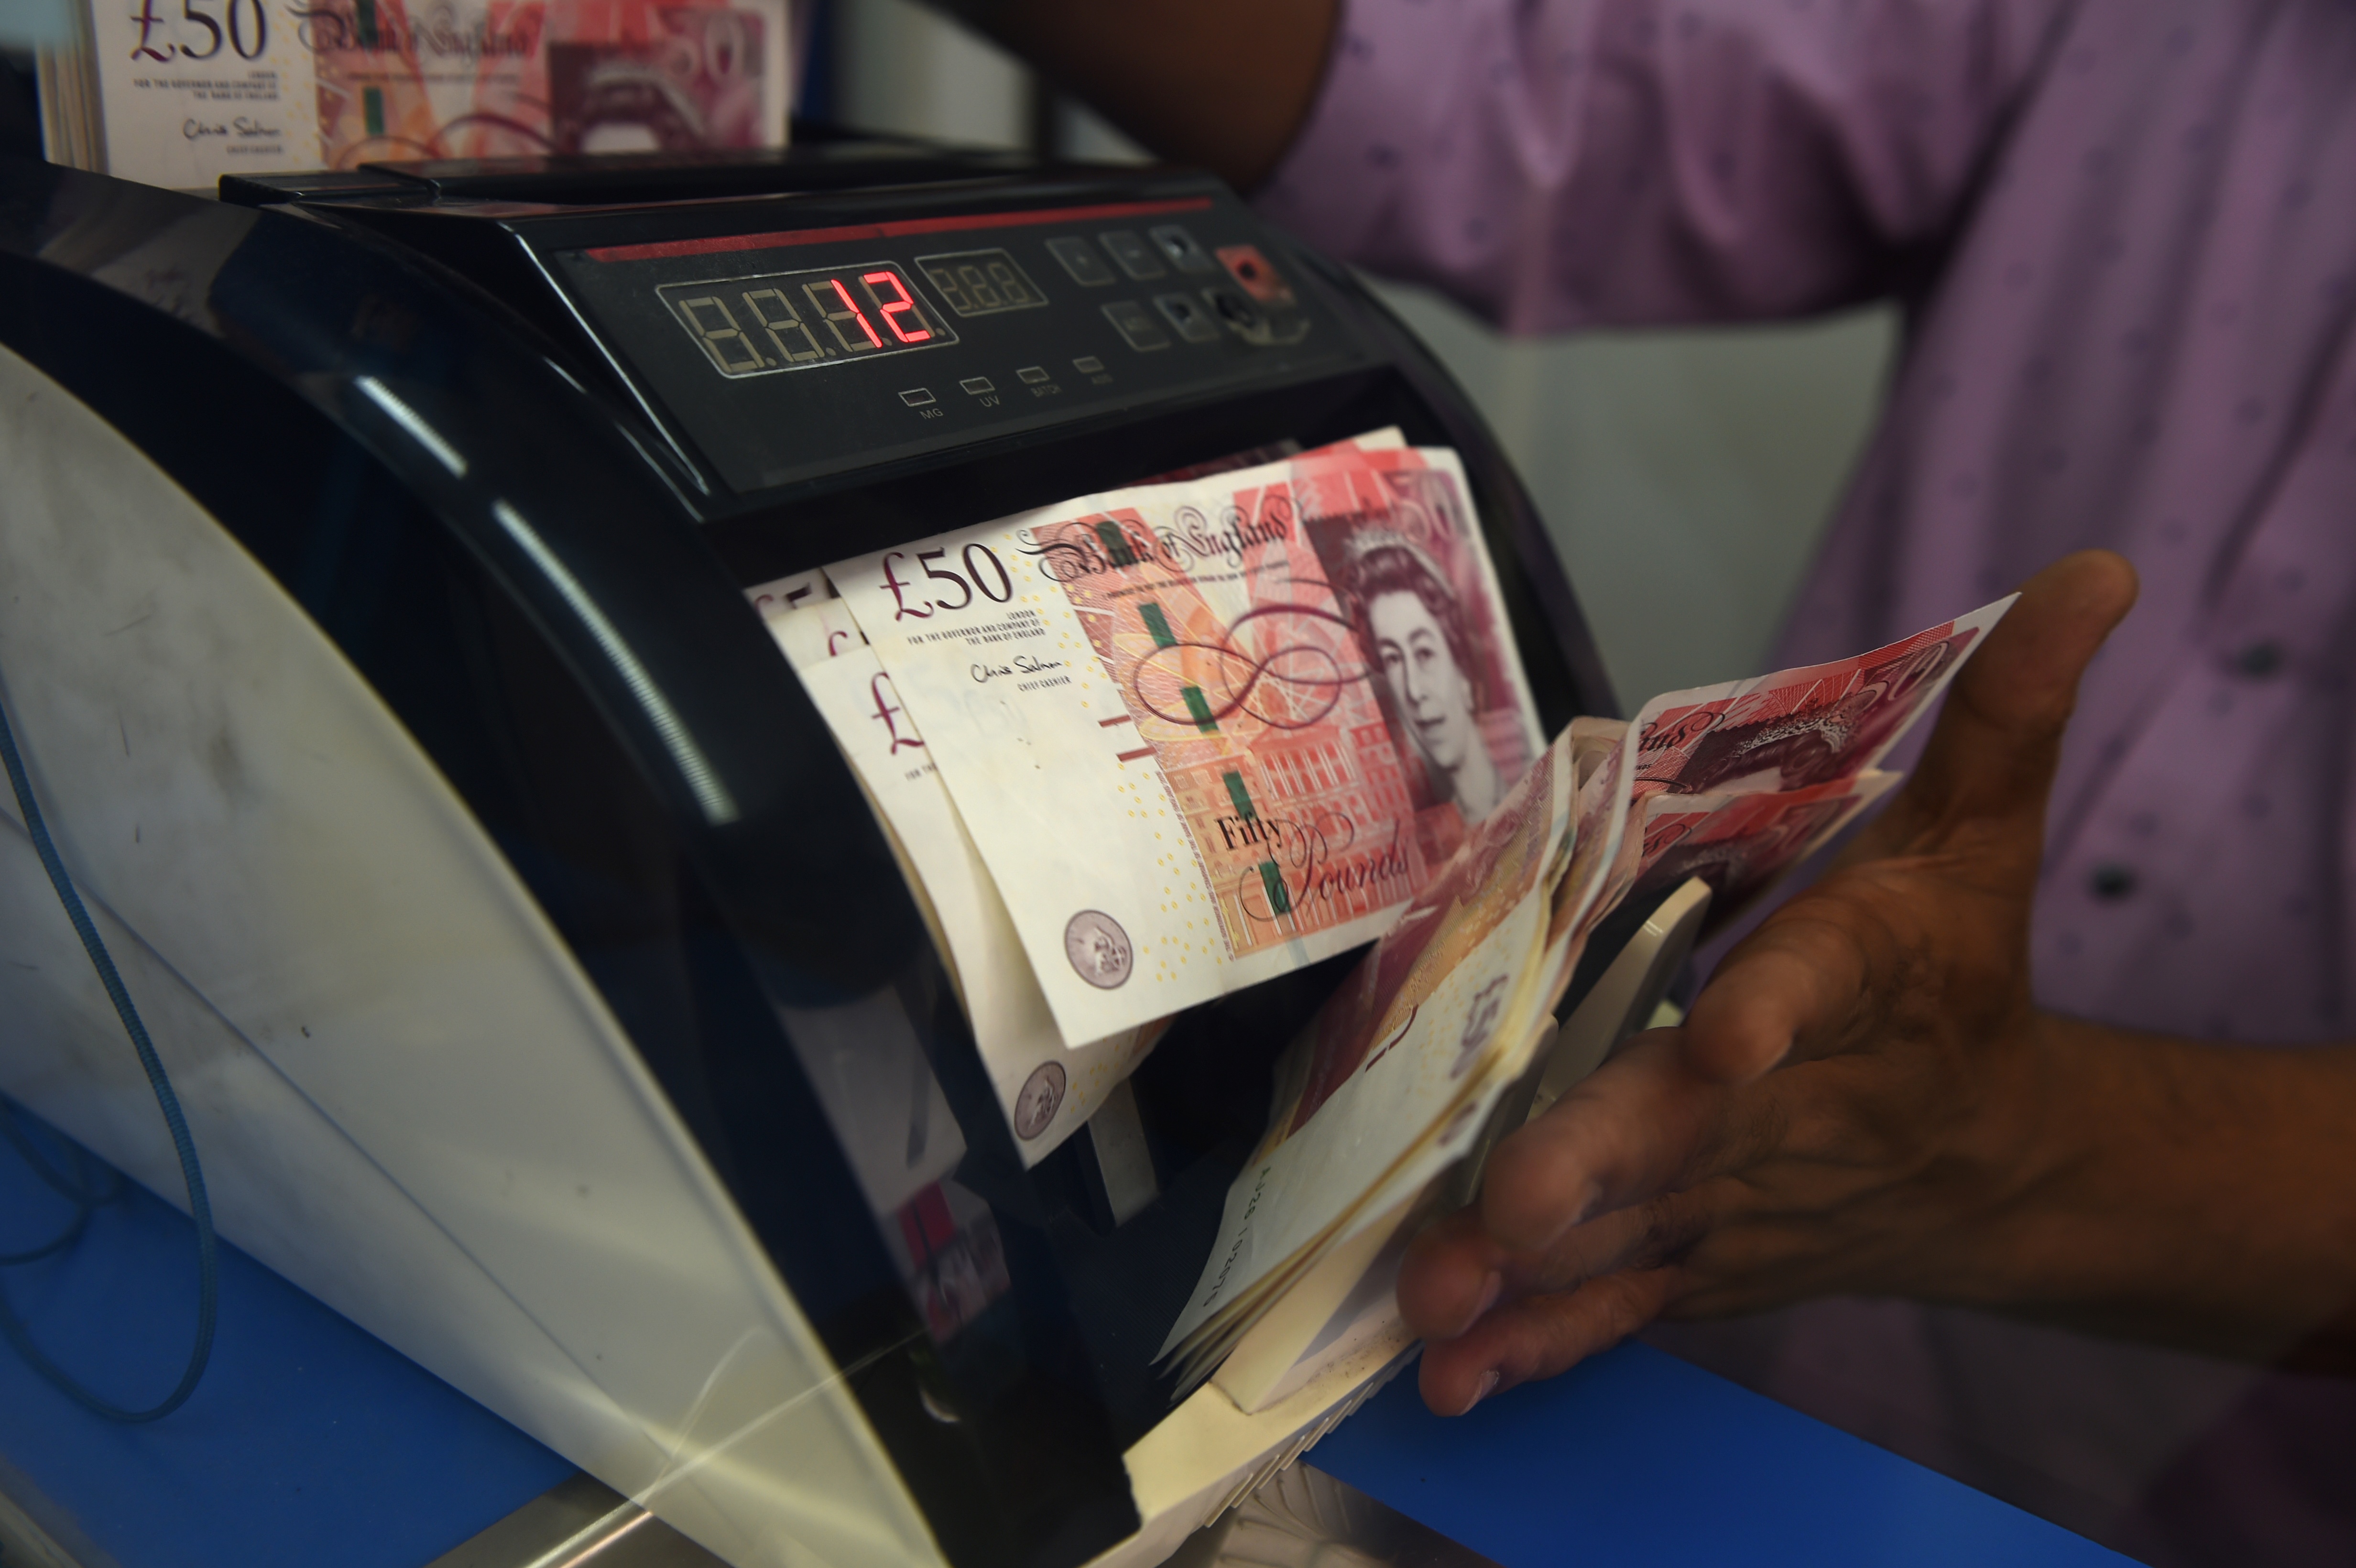 A money changer drops British pound notes into a counting machine at a currency exchange in Kuala Lumpur on January 16, 2017.  The pound struggled at 32-year lows against the dollar in Asia on January 16 after reports said British Prime Minister Theresa May was ready to take the country out of the European Union in a so-called "hard Brexit". / AFP PHOTO / MOHD RASFAN